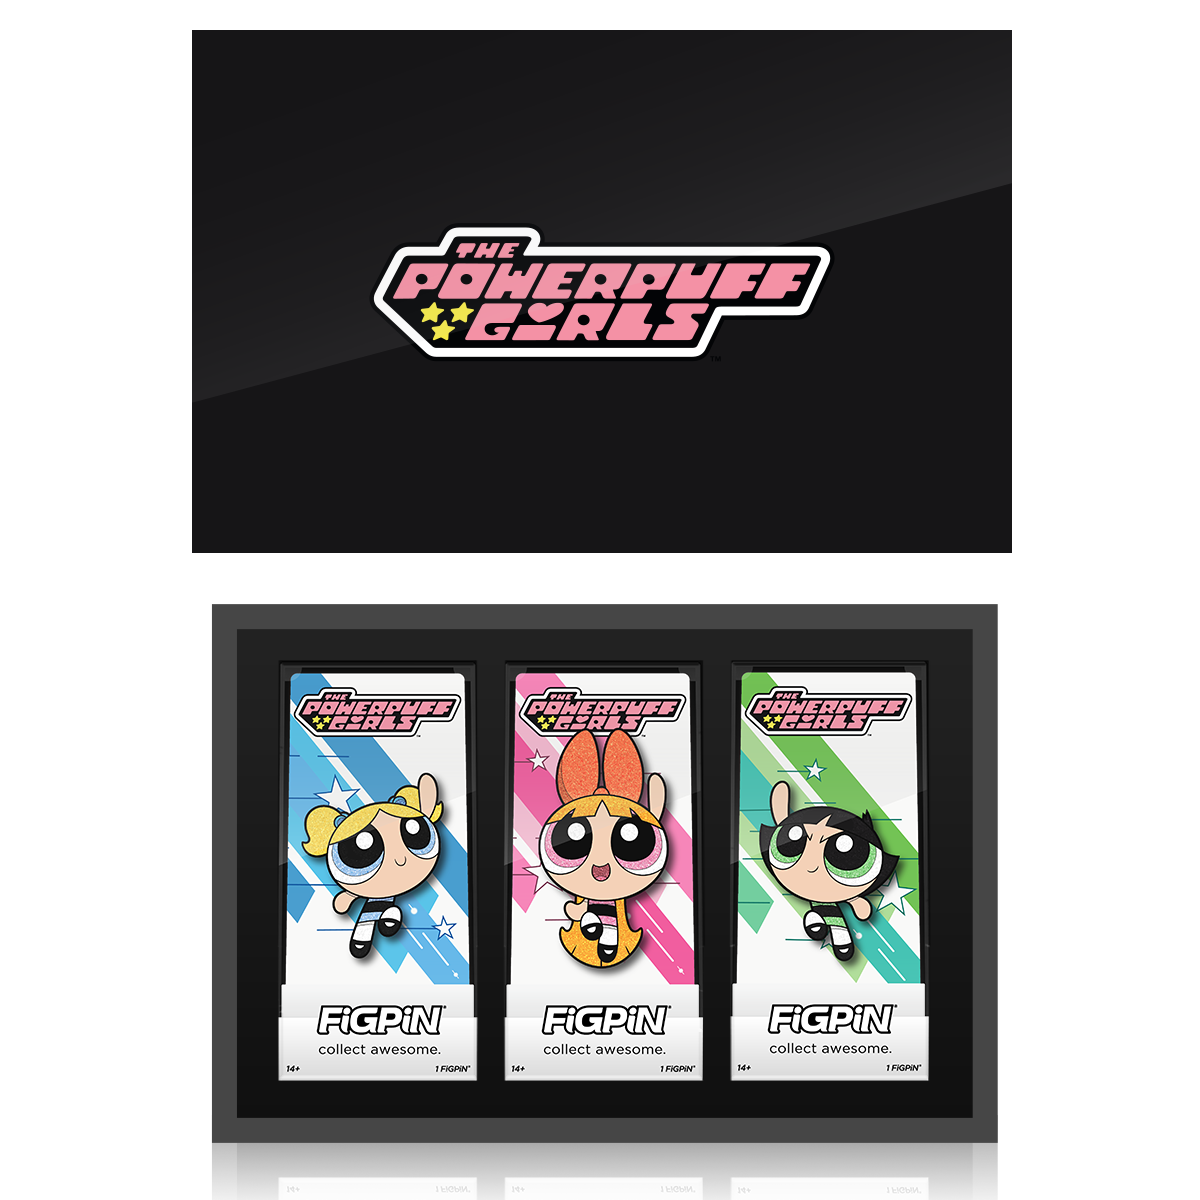 Art Render of The Powerpuff Girl's Bubbles, Blossom, and Buttercup inside the display cases and the outside design of the box set